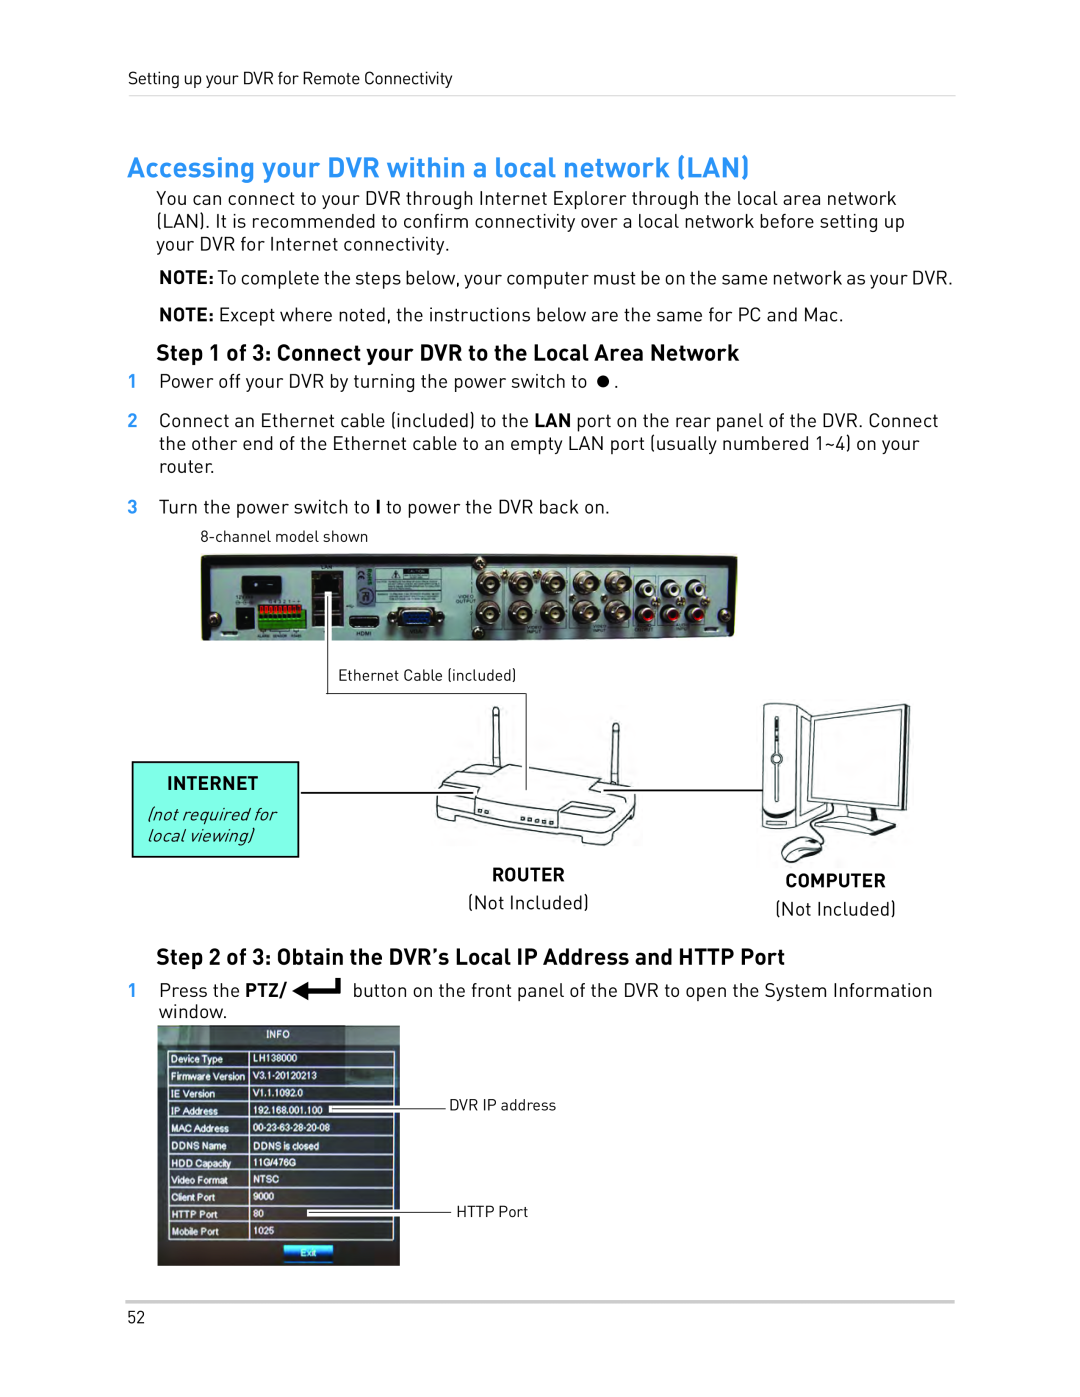 LOREX Technology LH1361001C8B, LH130 Accessing your DVR within a local network LAN, Internet, Not Included 